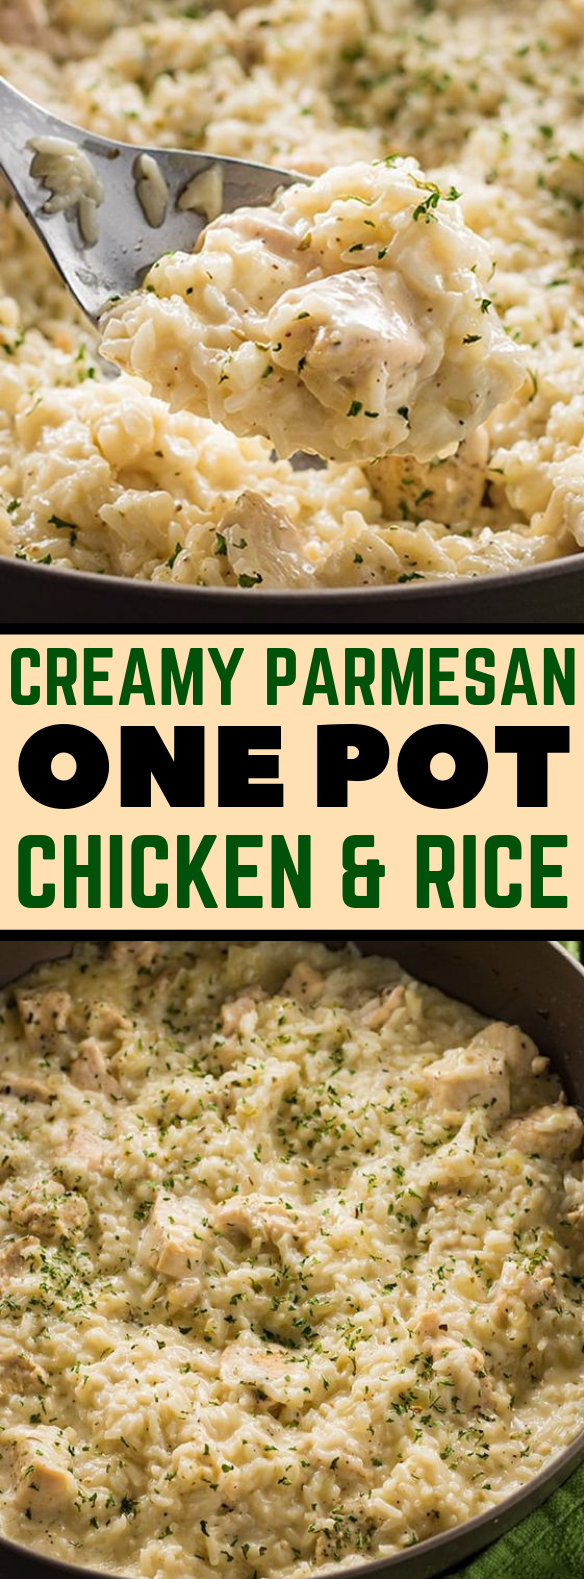 CREAMY PARMESAN ONE POT CHICKEN AND RICE #dinner #easyrecipe